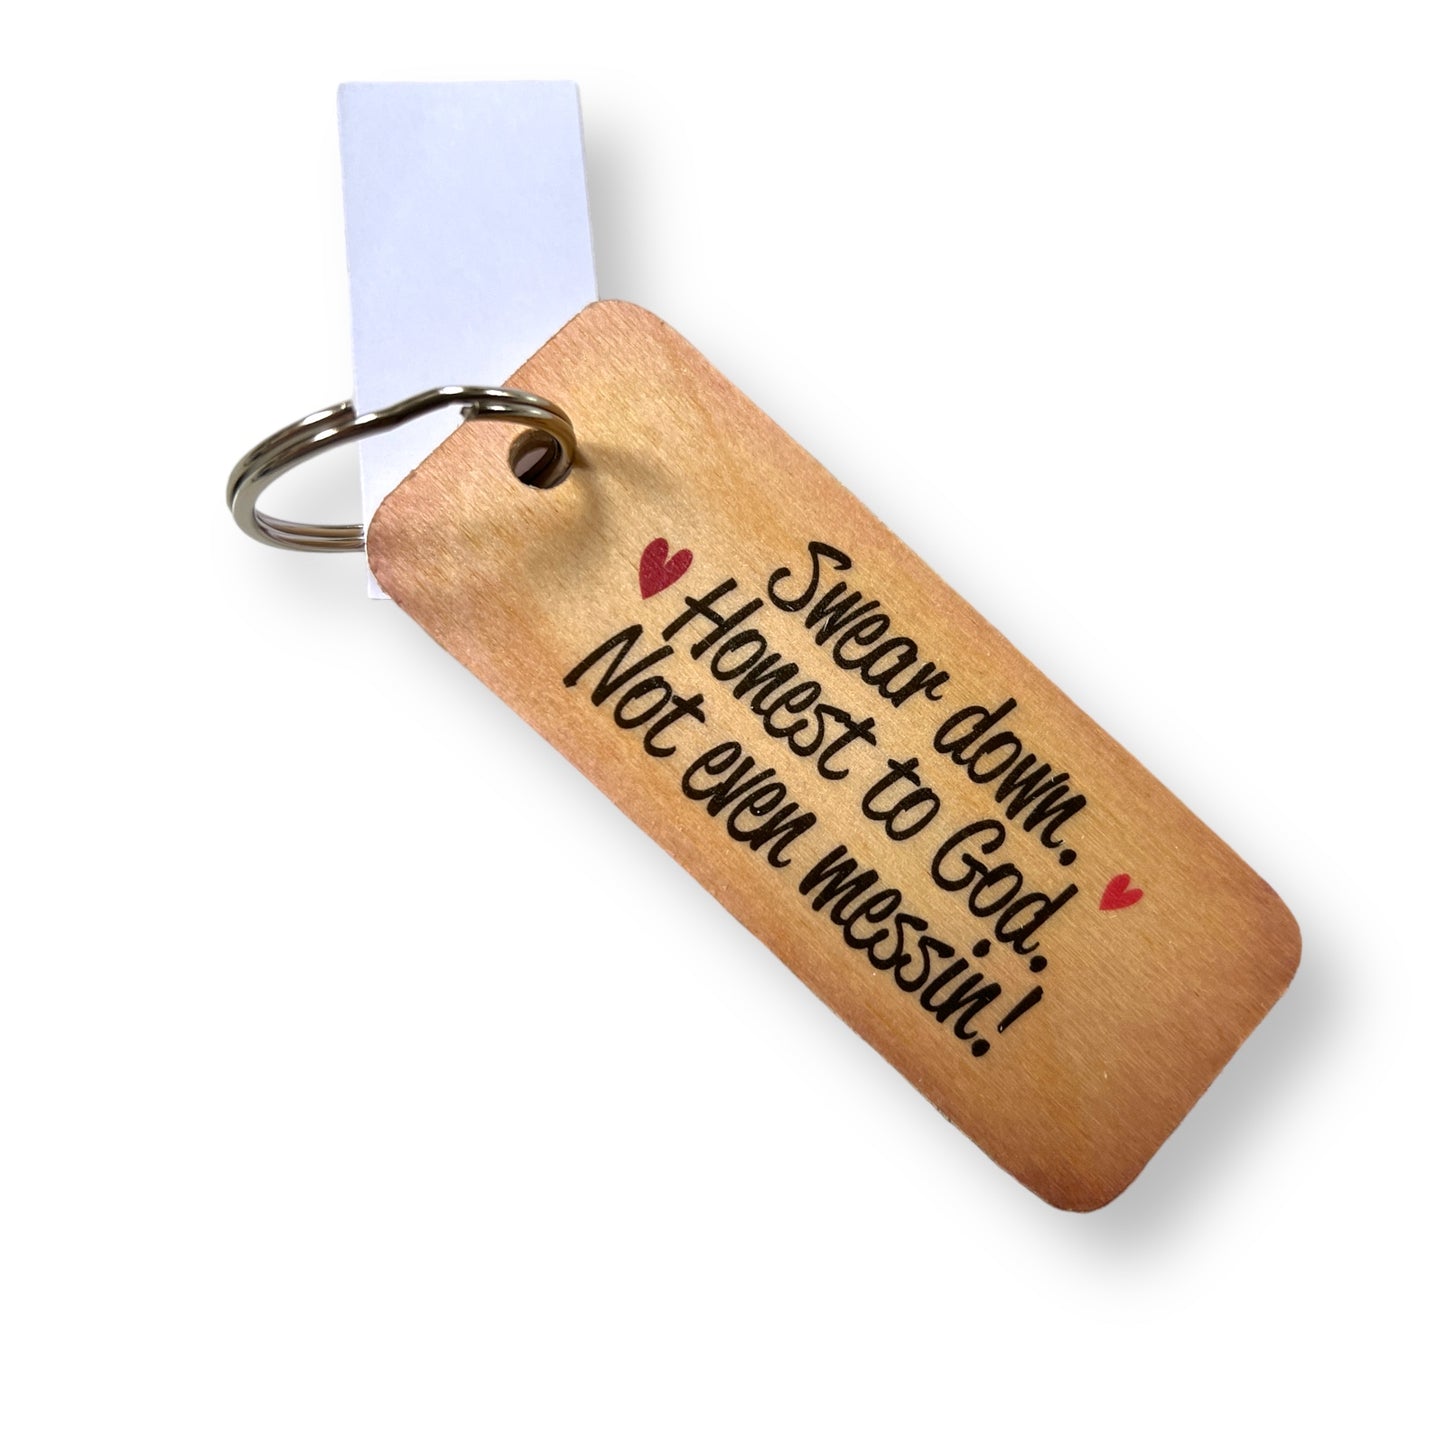 Swear Down. Honest to God. Not even messin! Wooden Keyring